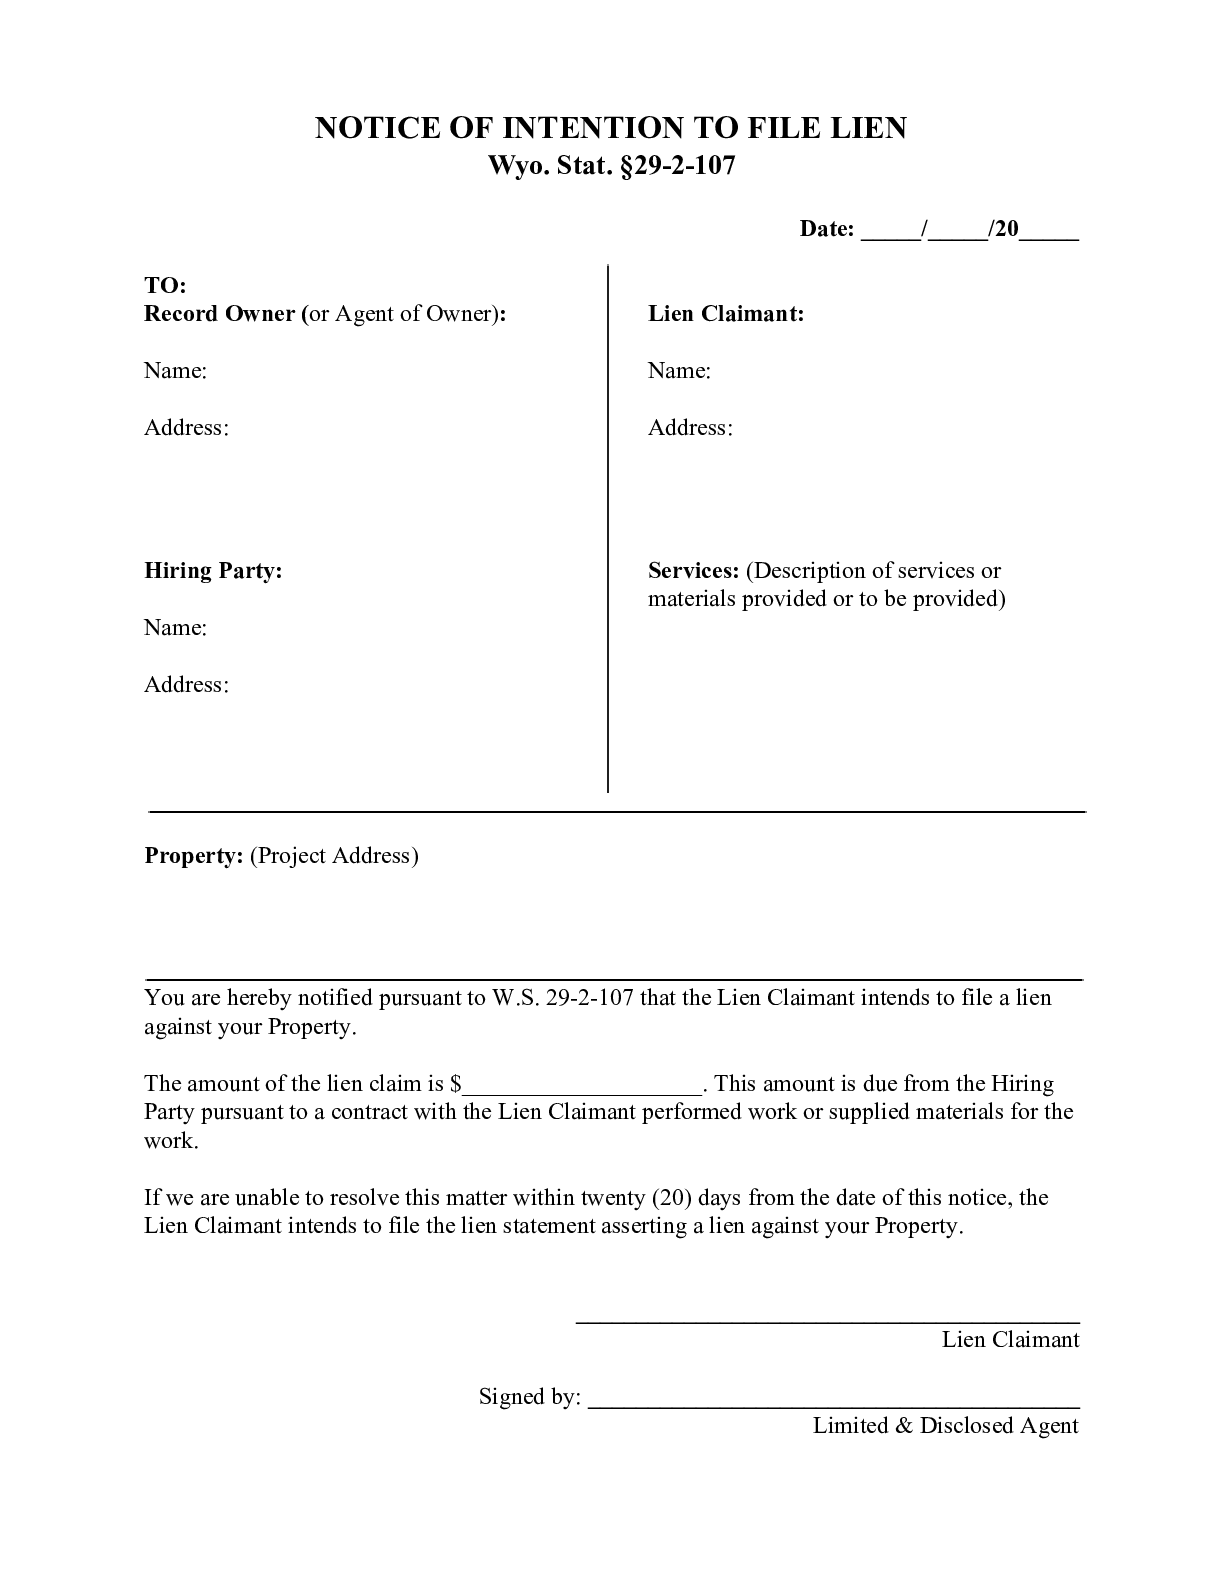 Wyoming Notice of Intent to Lien Form | Free Downloadable Template - free from